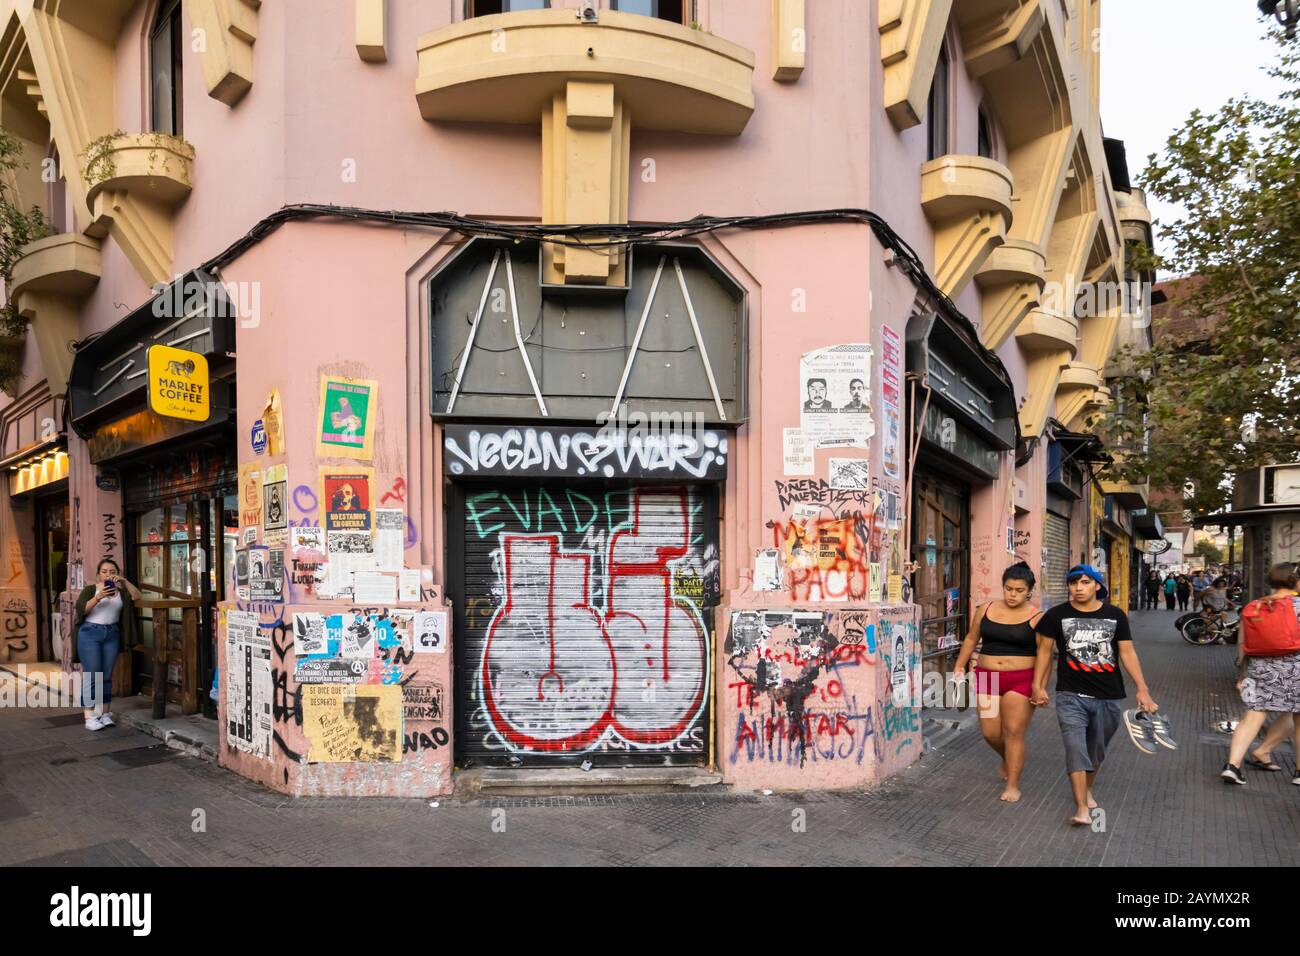 Graffiti and posters from the political unrest and protests on a shuttered shop in Lastarria, Central Santiago, Metropolitan Region, capital of Chile Stock Photo